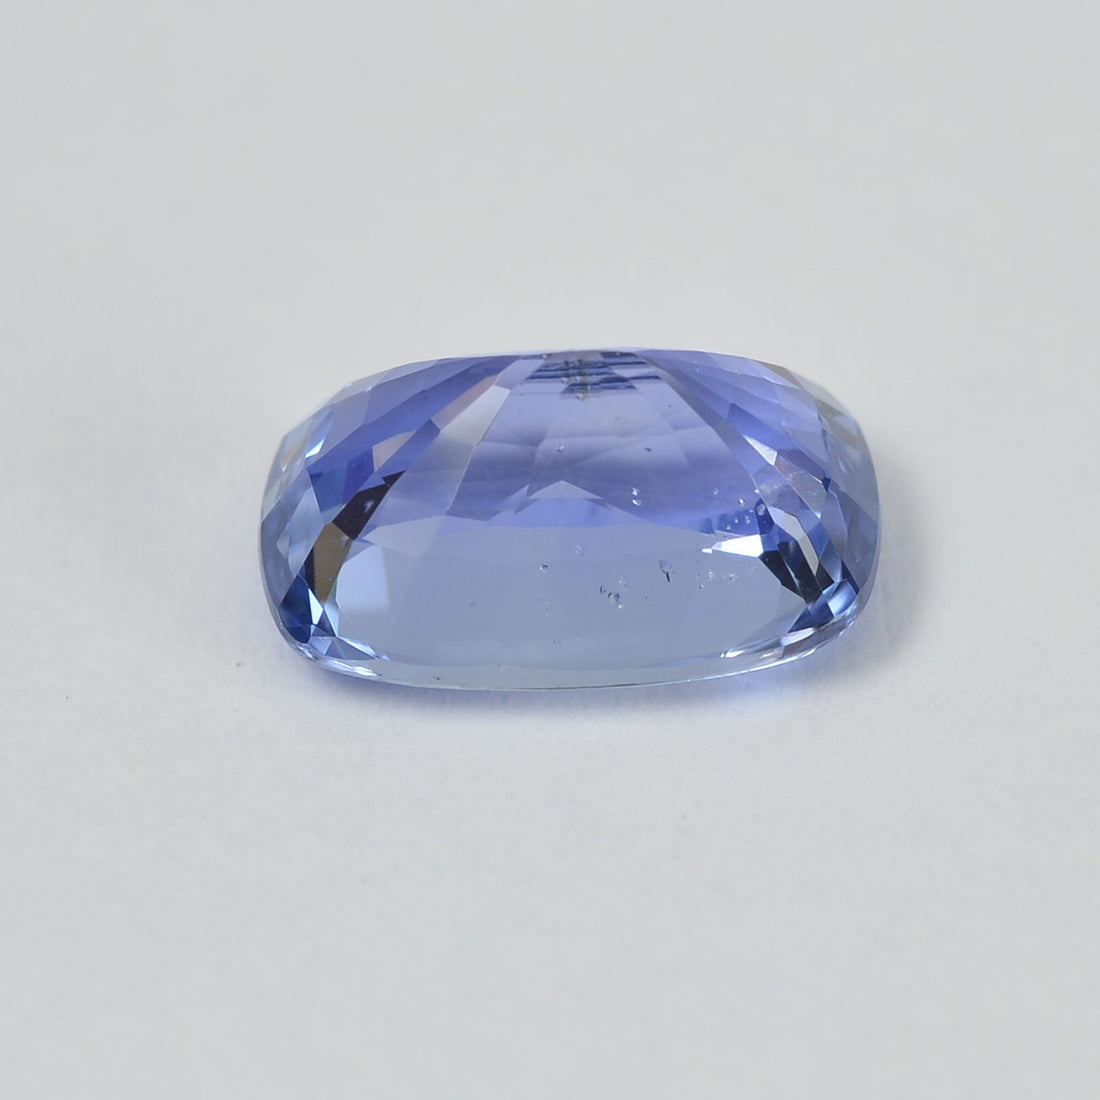 2.10 cts Unheated Natural Blue Sapphire Loose Gemstone Cushion Cut Certified